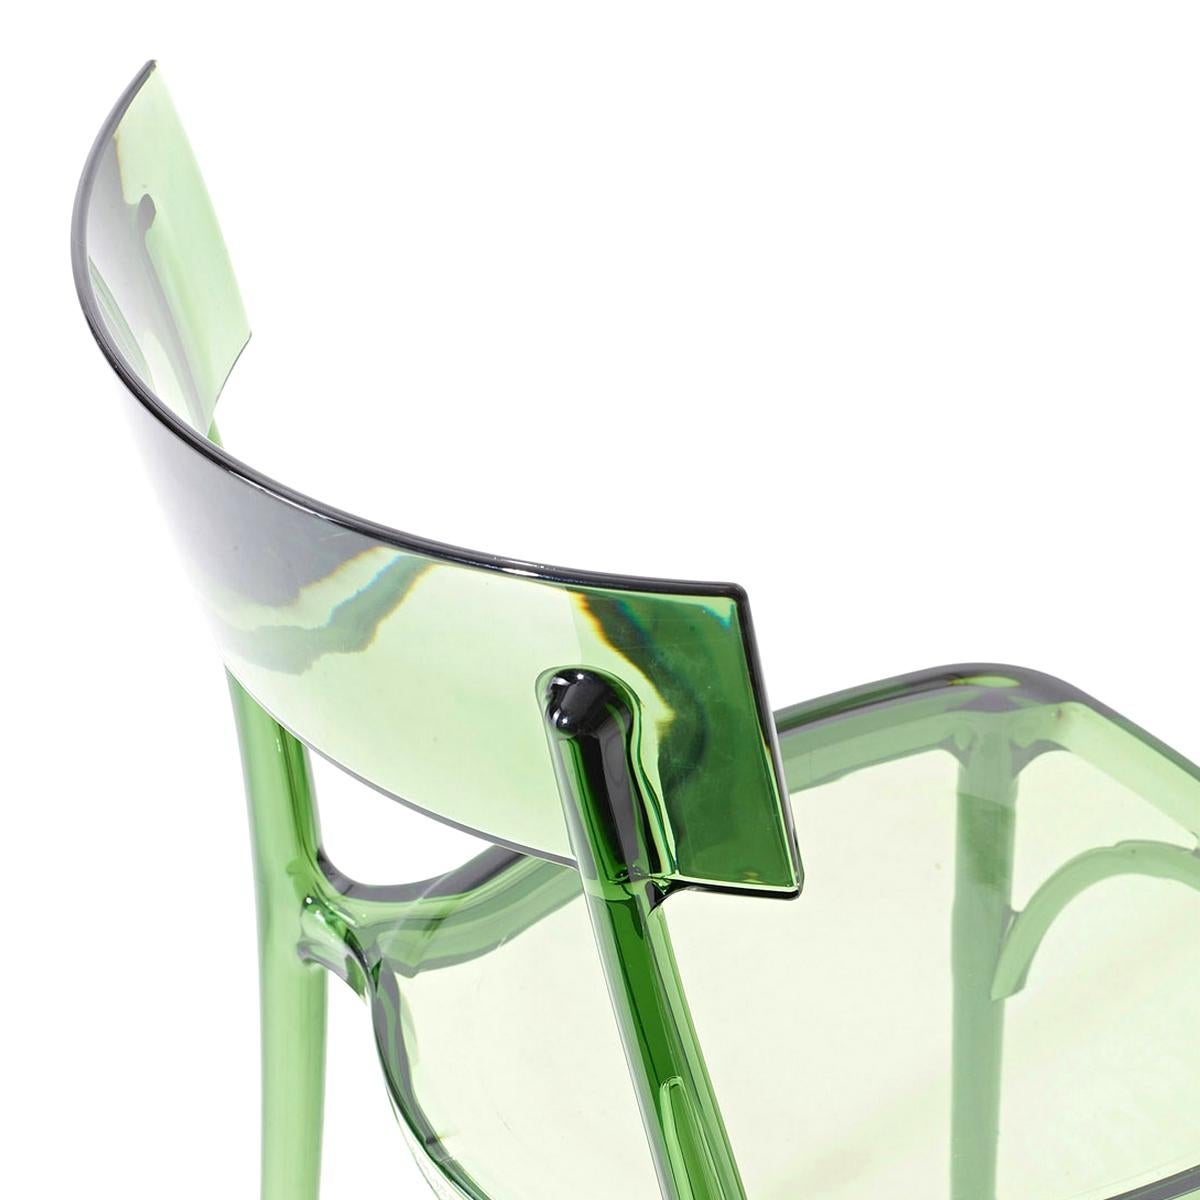 polycarbonate chairs